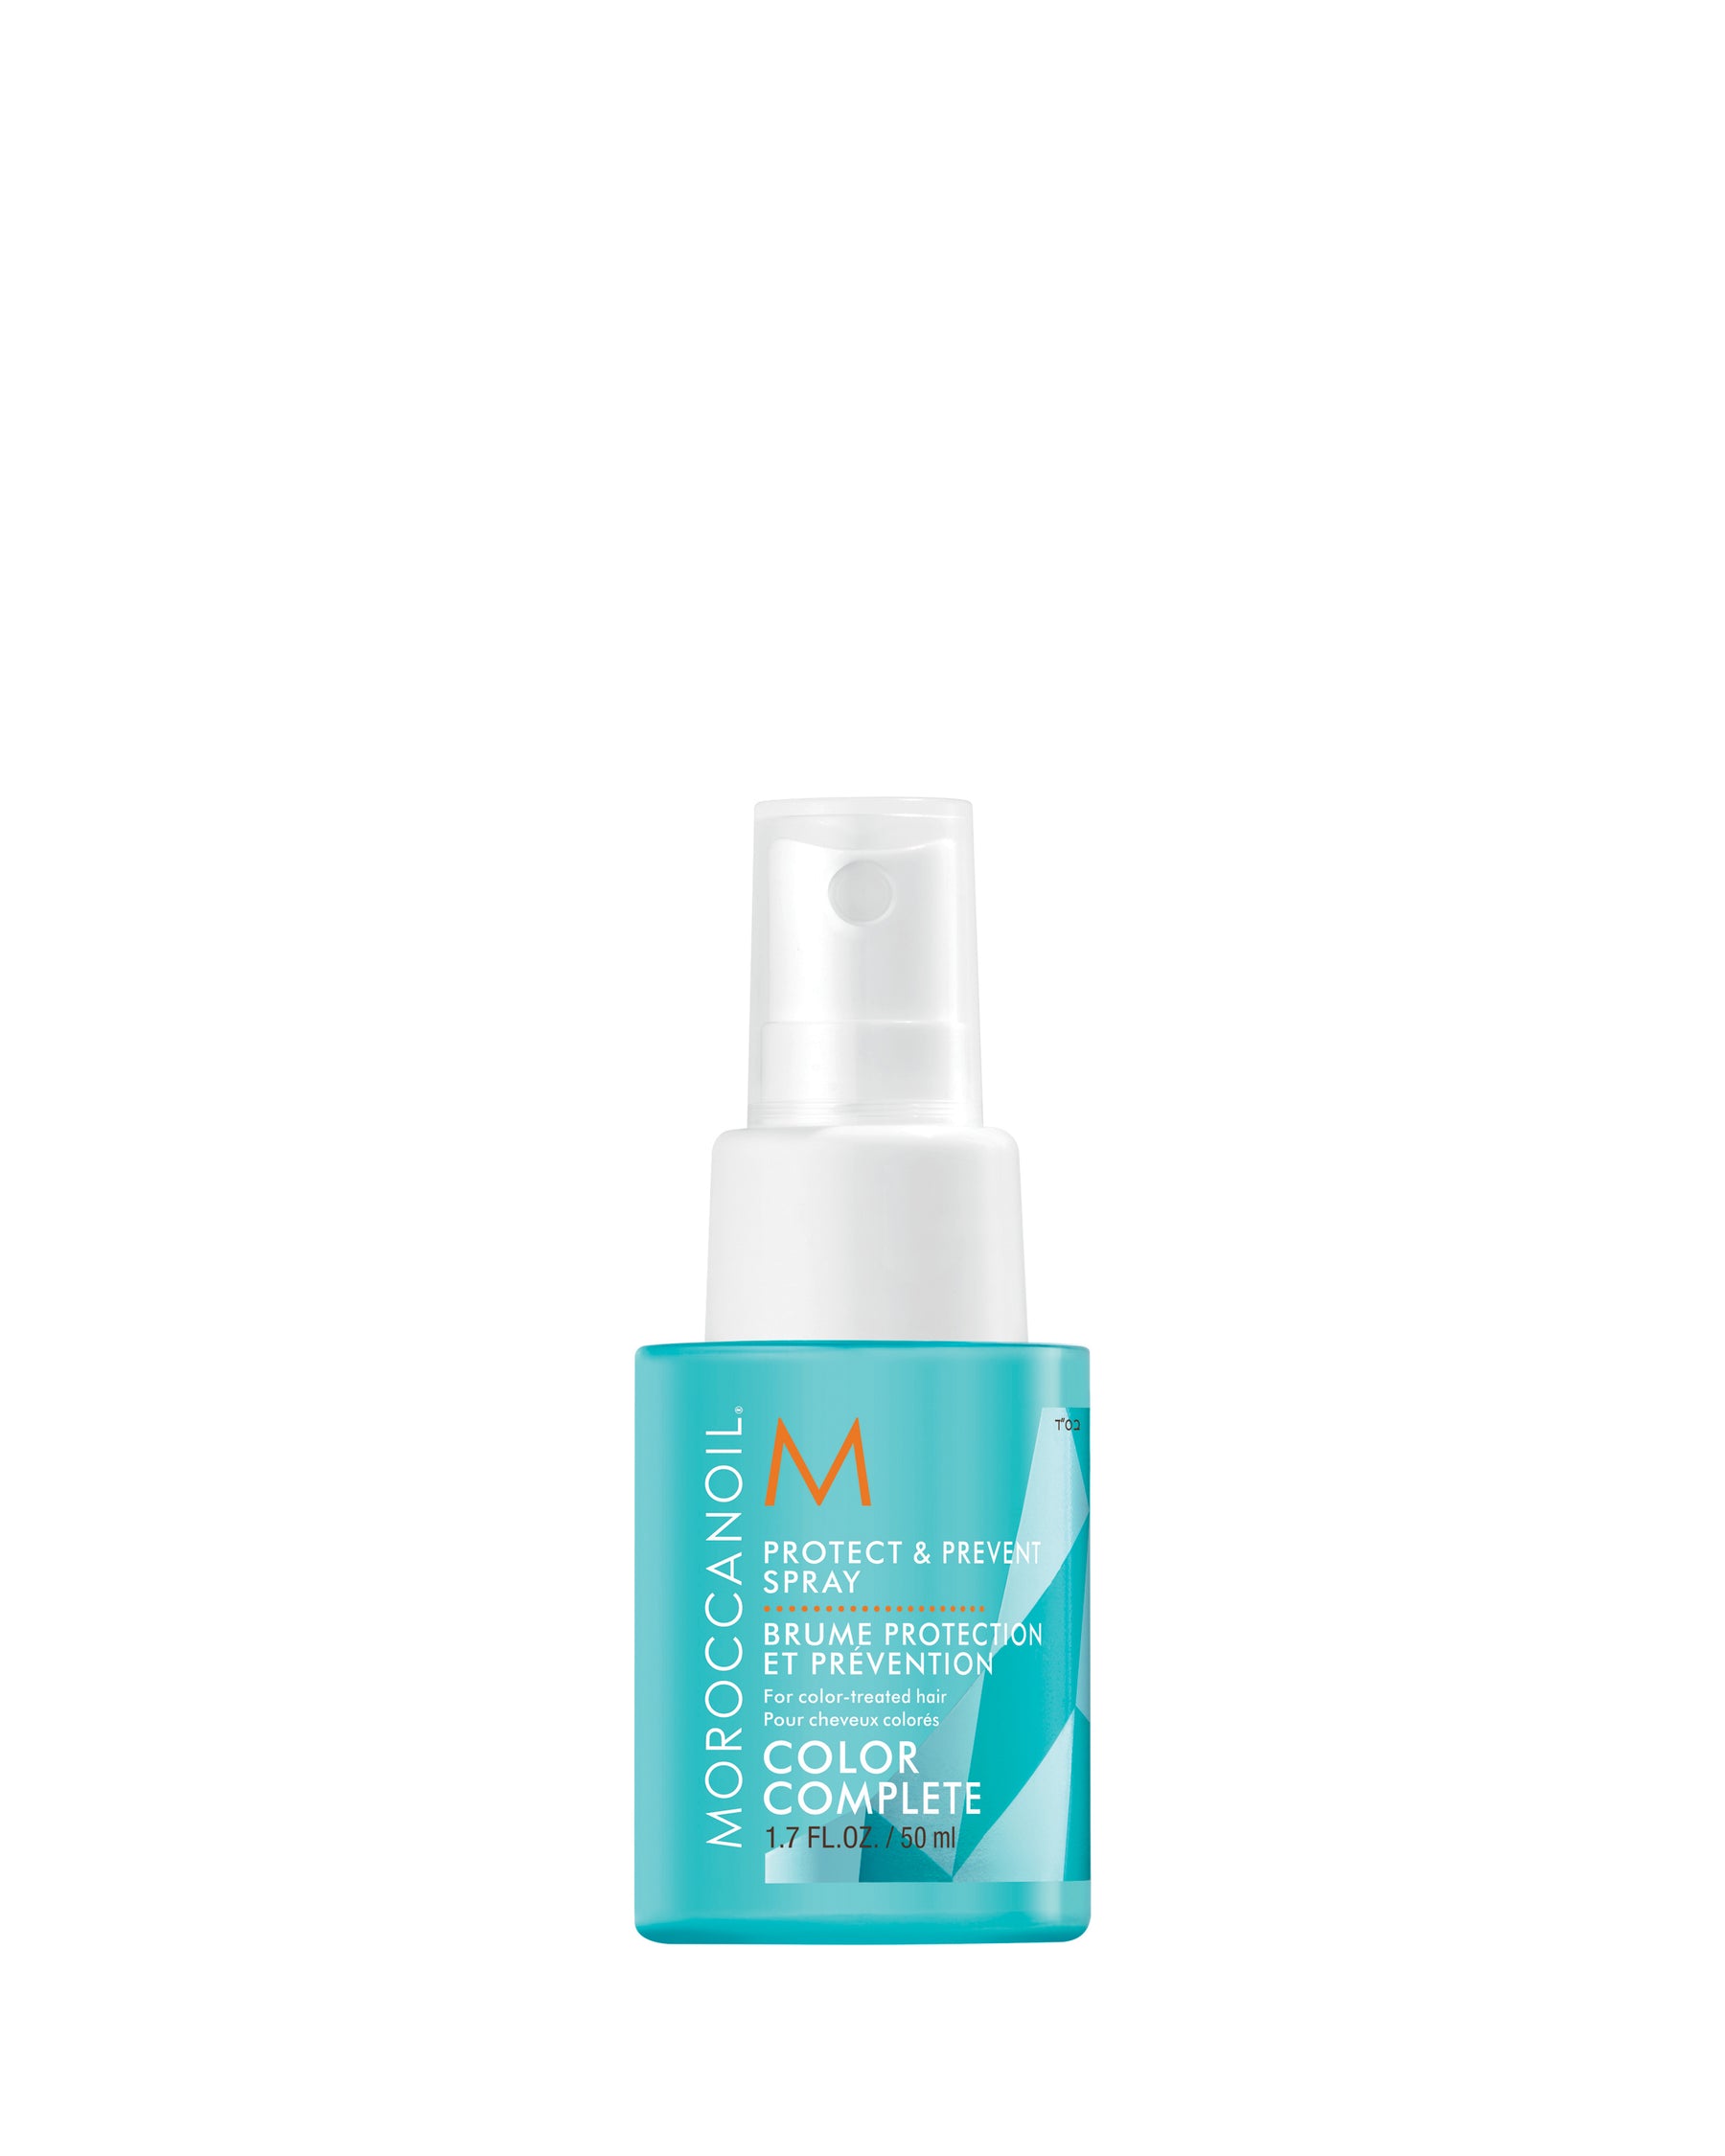 Moroccanoil - Color Complete - Protect & prevent spray - 50ml | 1.7oz - ProCare Outlet by Moroccanoil